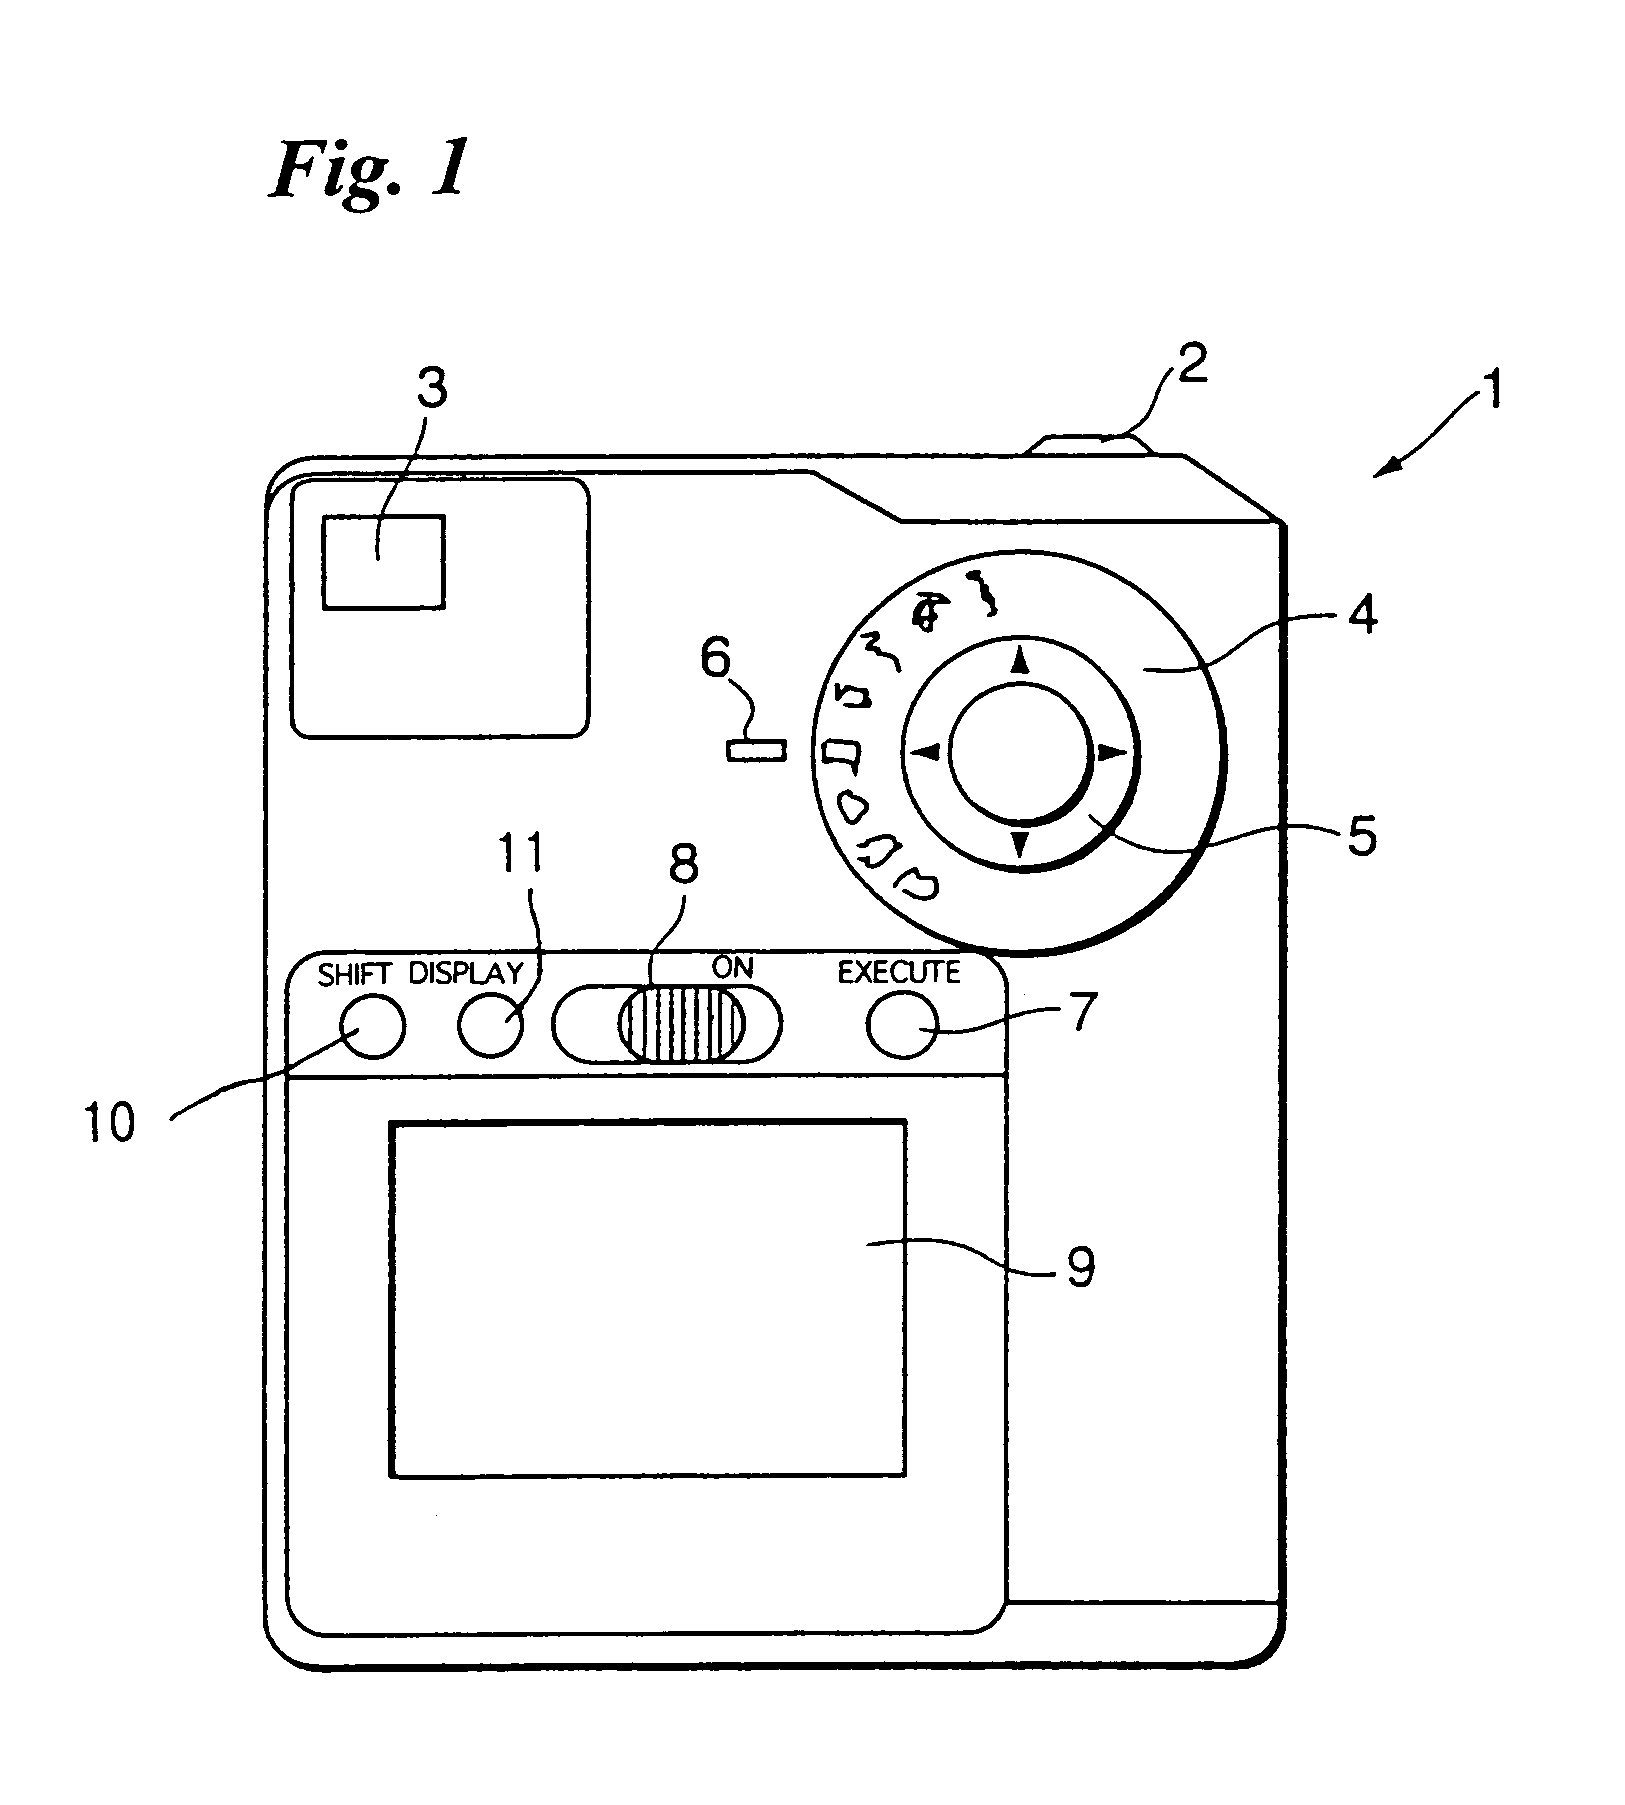 Digital still camera with composition advising function, and method of controlling operation of same